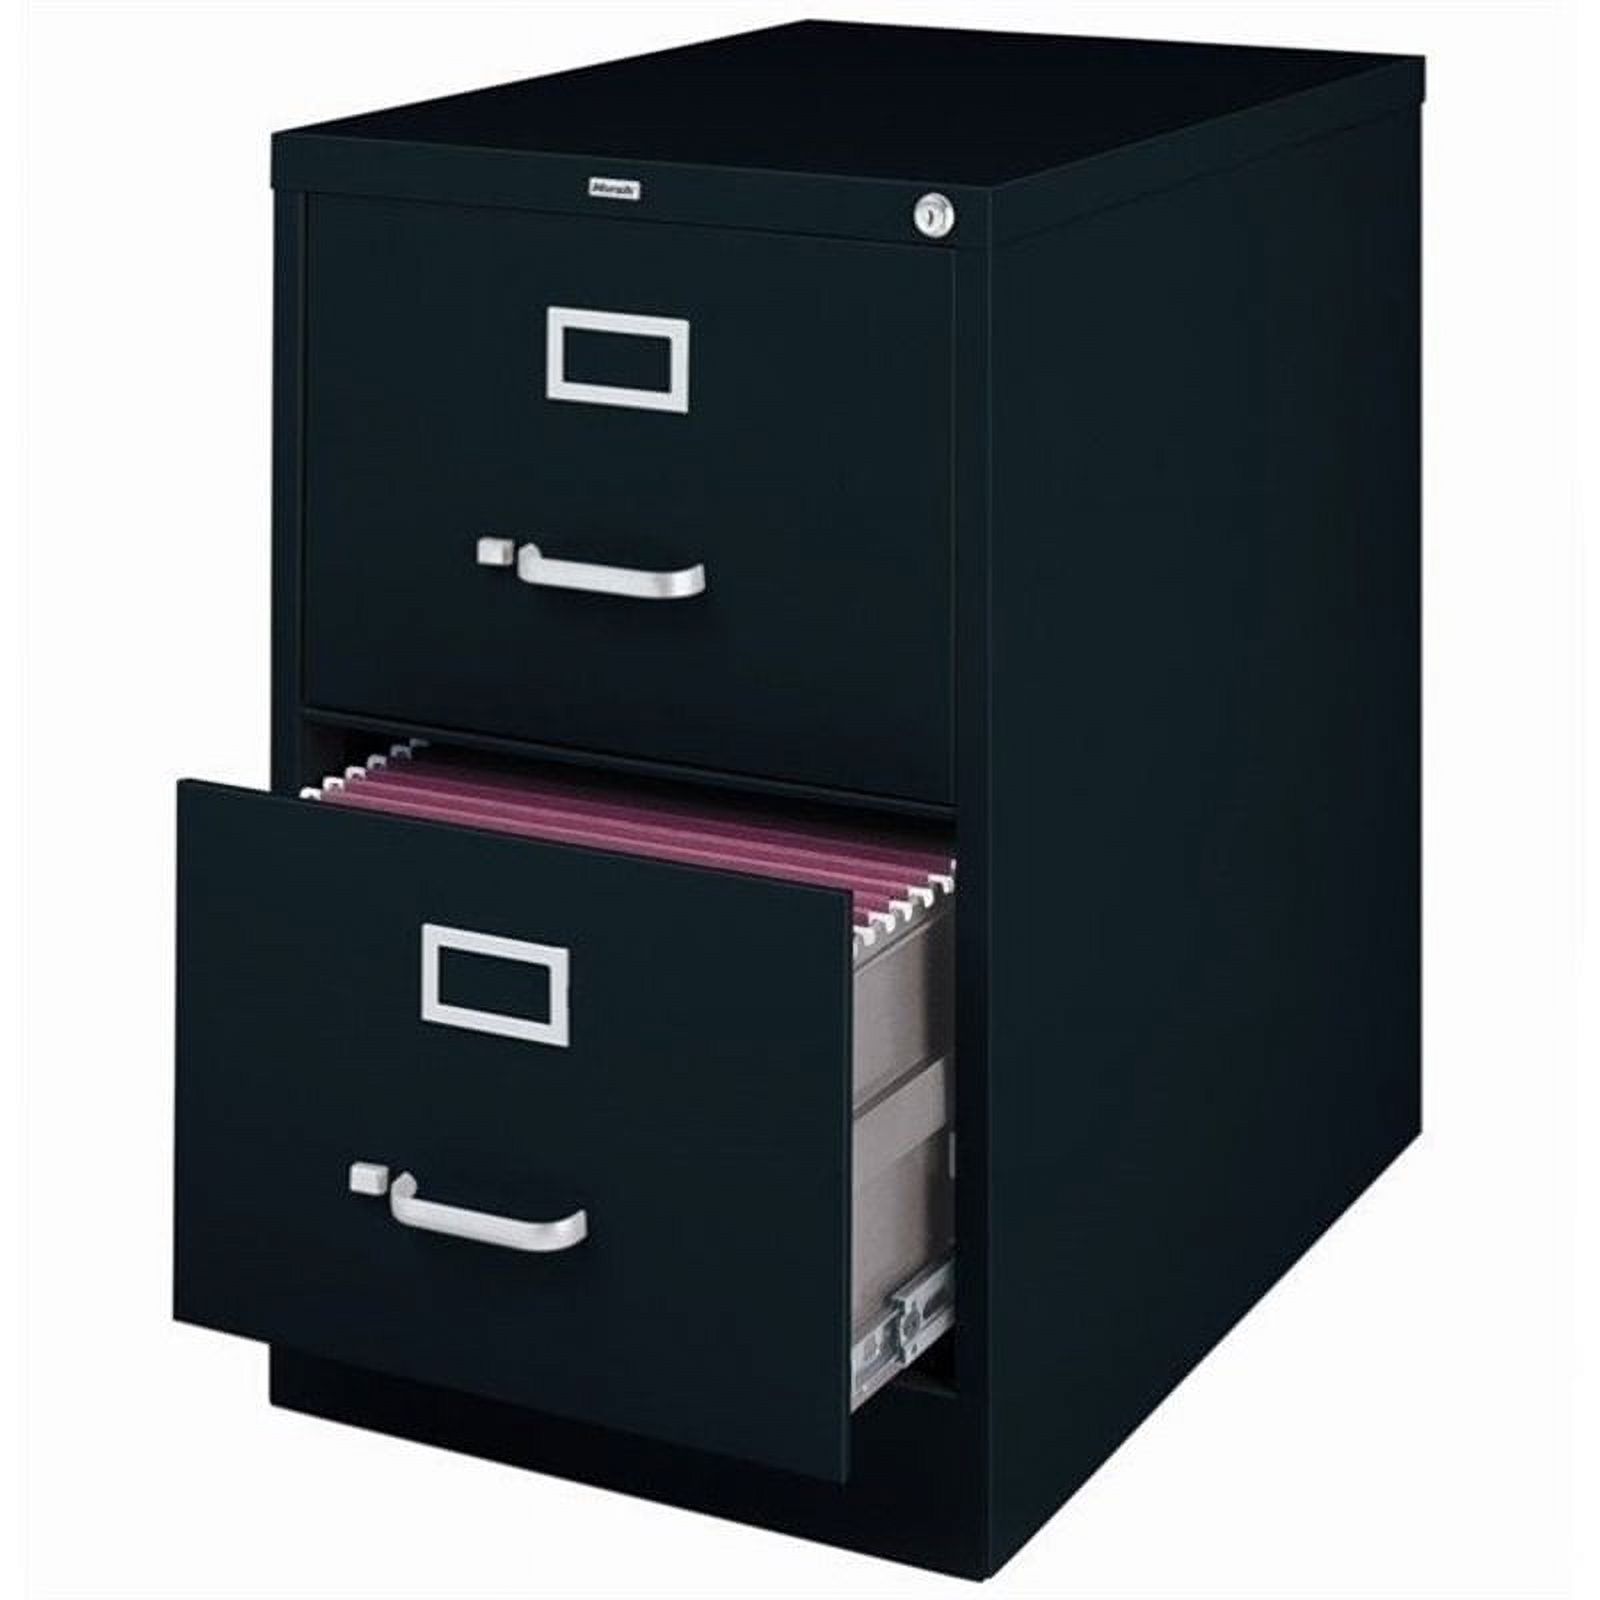 (Value Pack) 2 Drawer File Cabinet and 3 Drawer File Cabinet - image 4 of 4